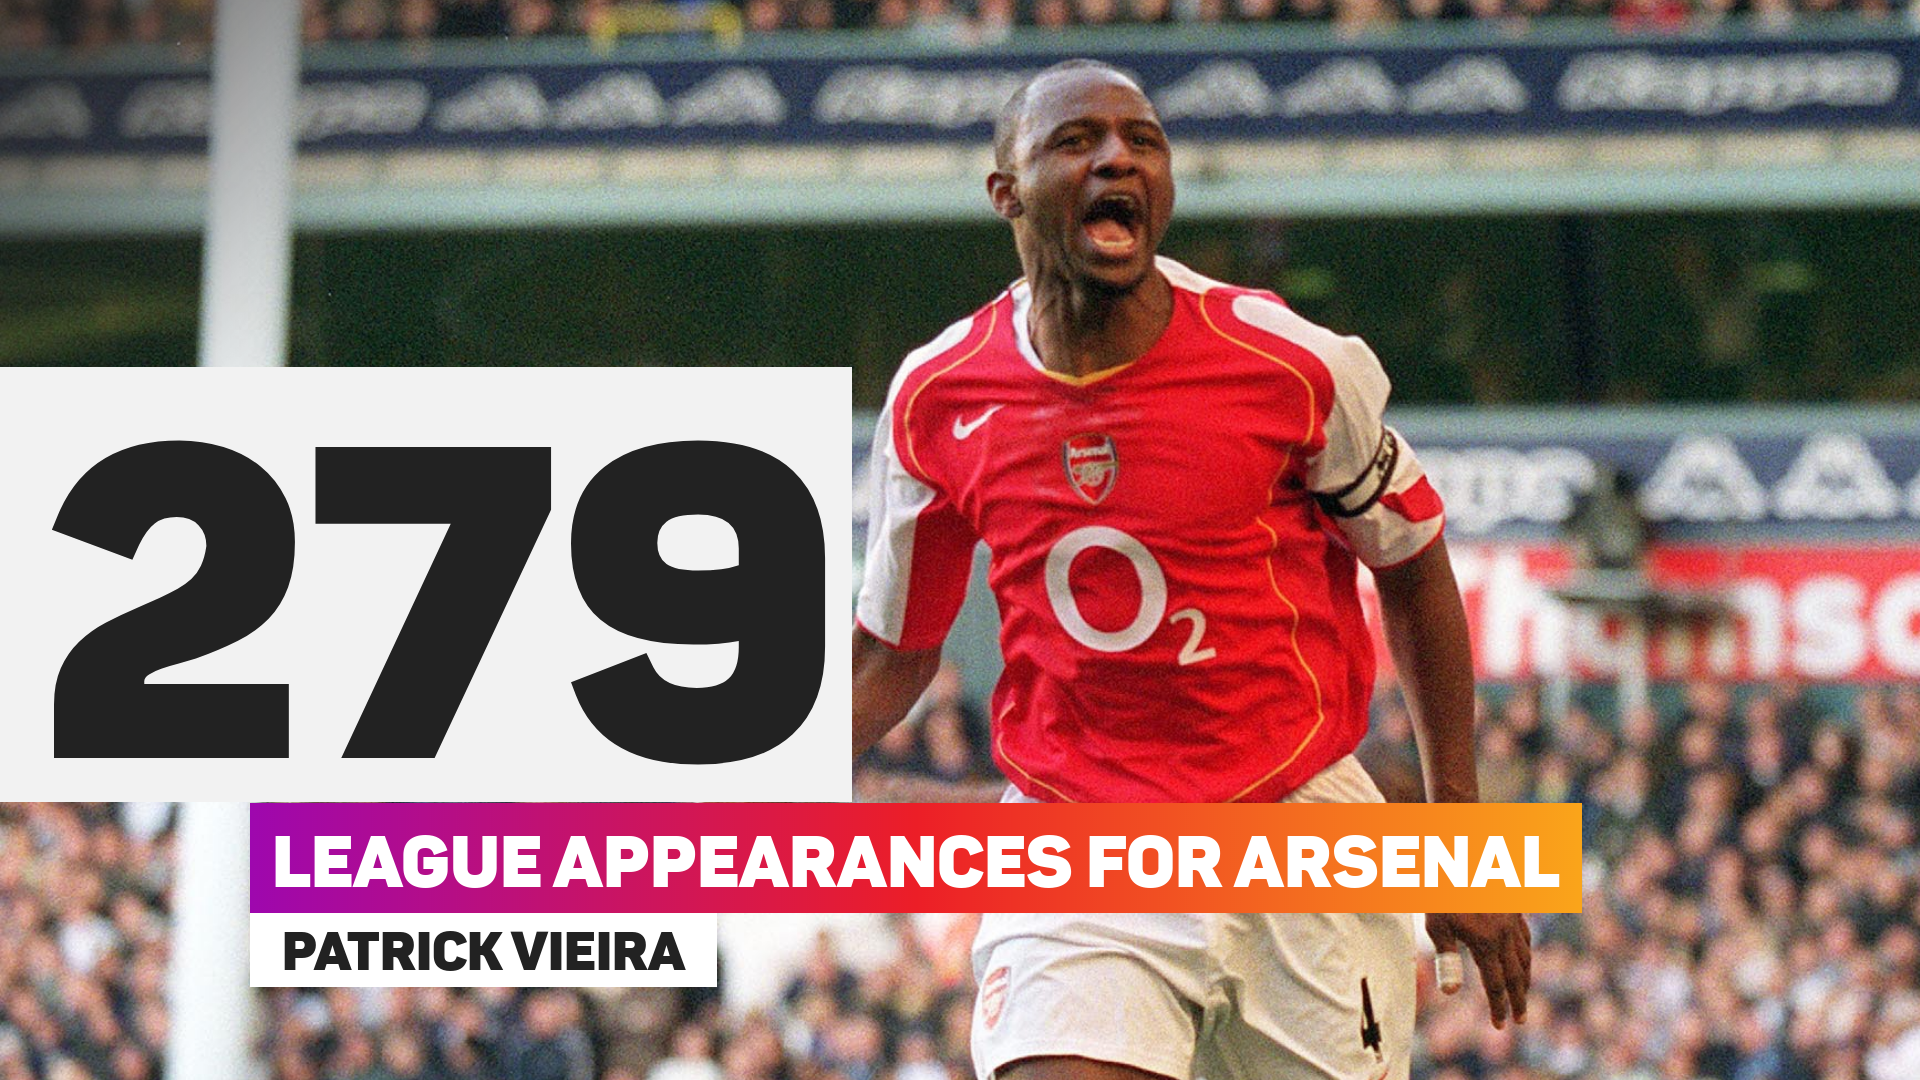 Patrick Vieira is an Arsenal great